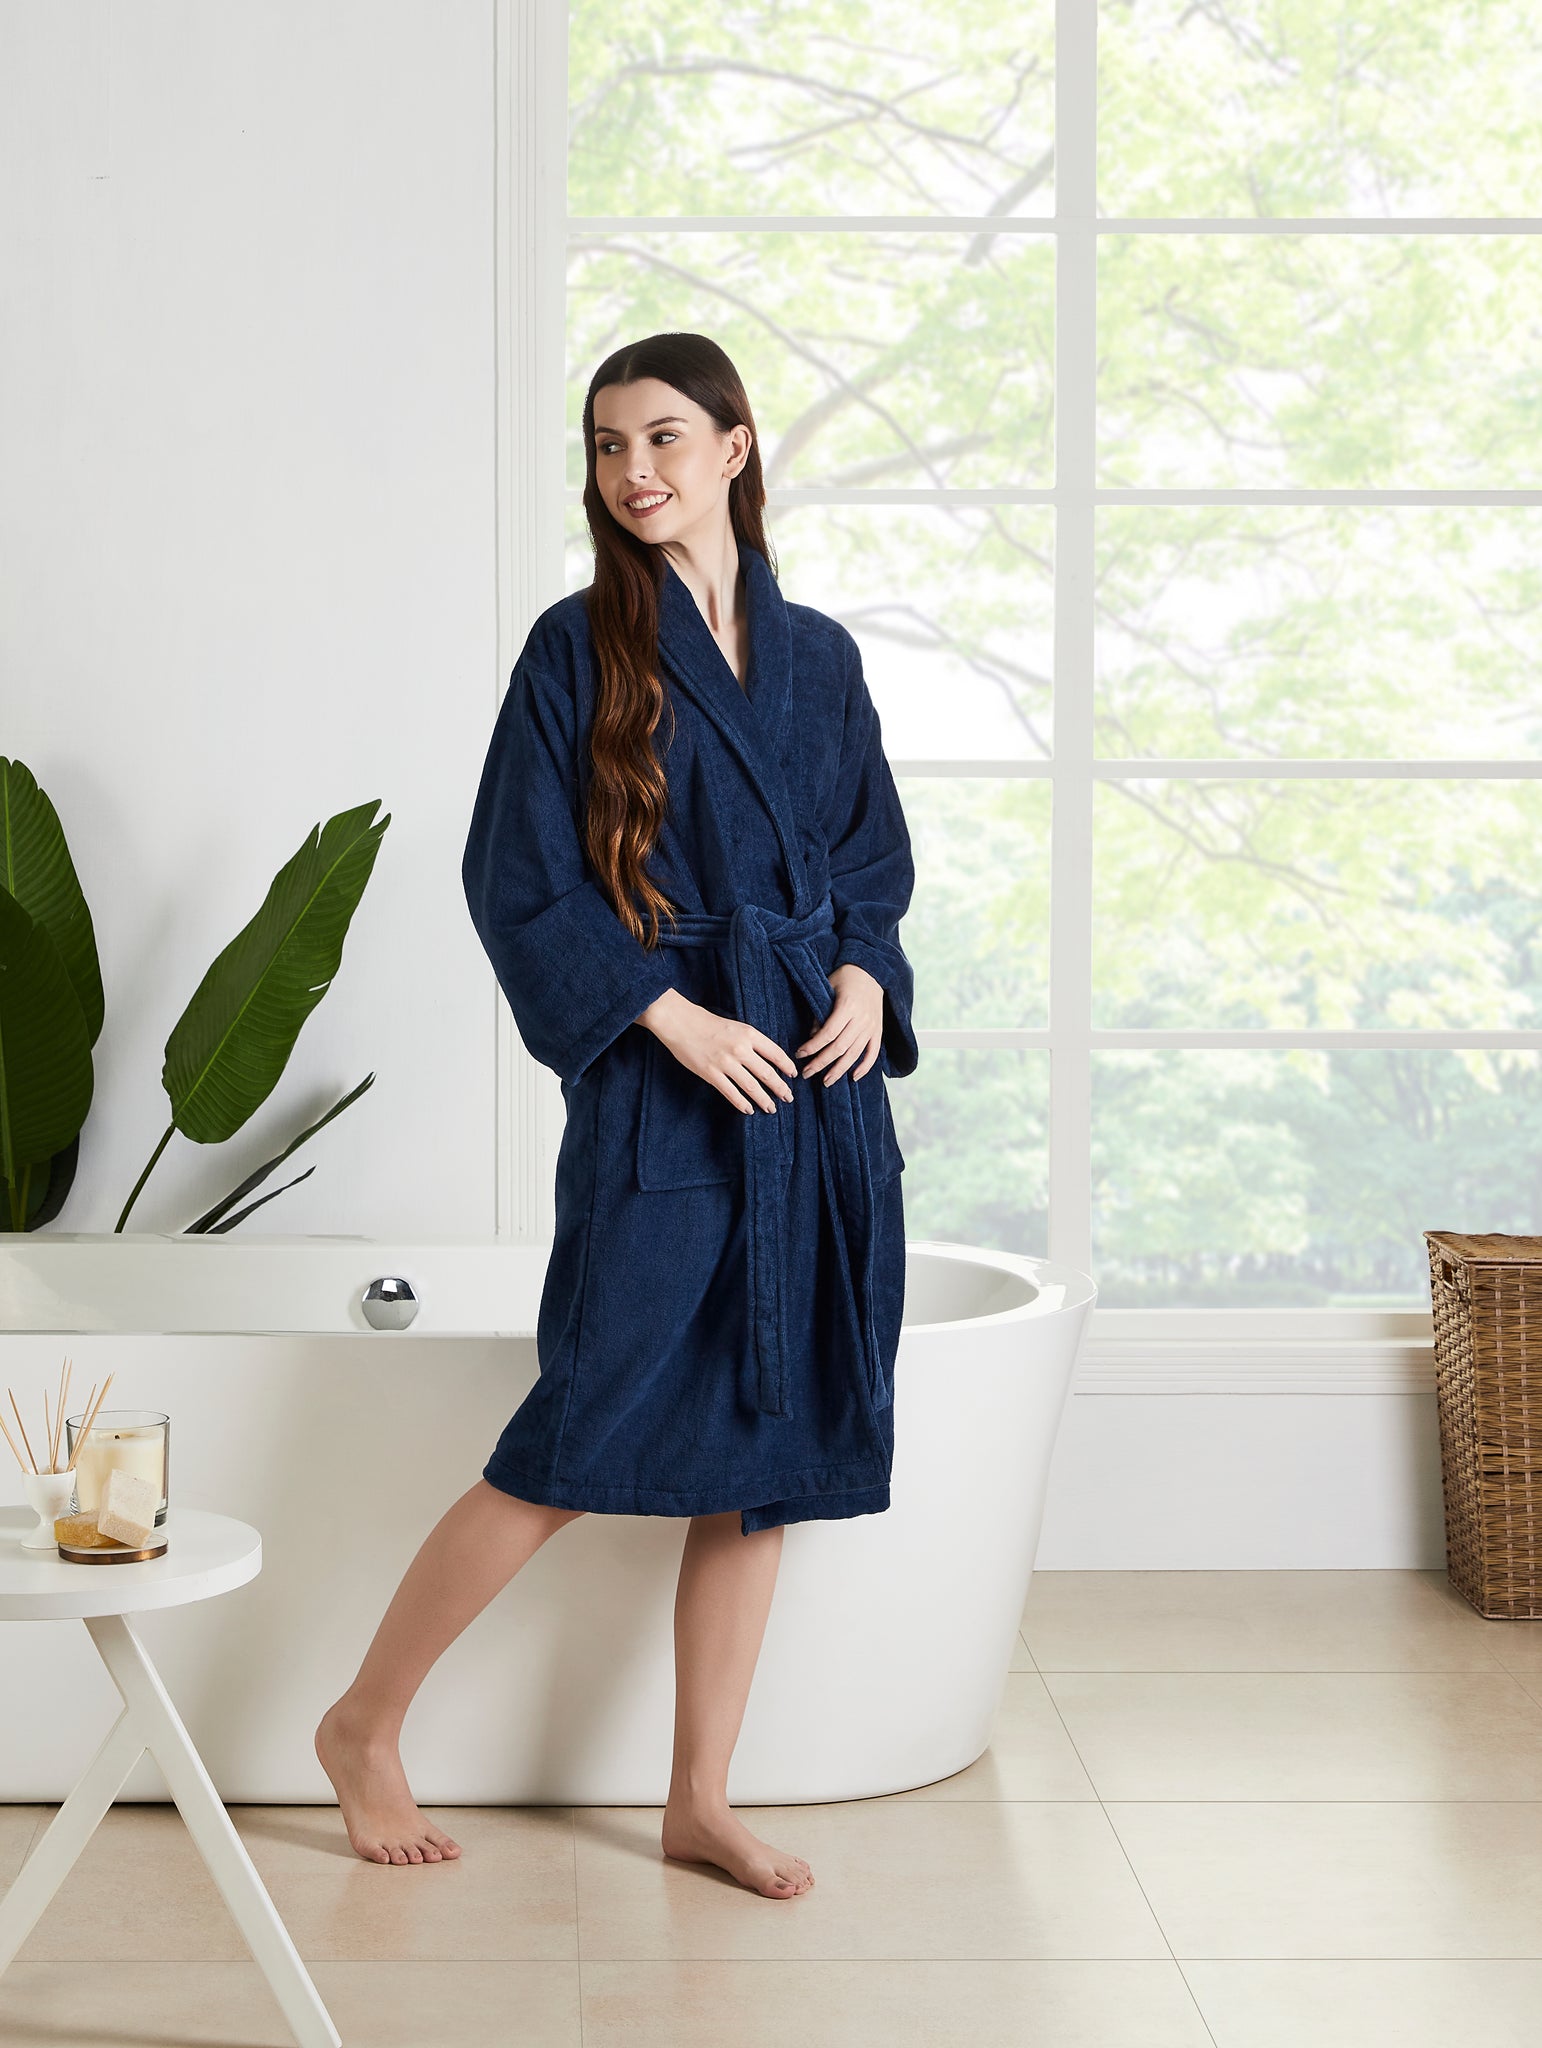 Bath Robes | Luxury Hotel Robes | Four Seasons at Home